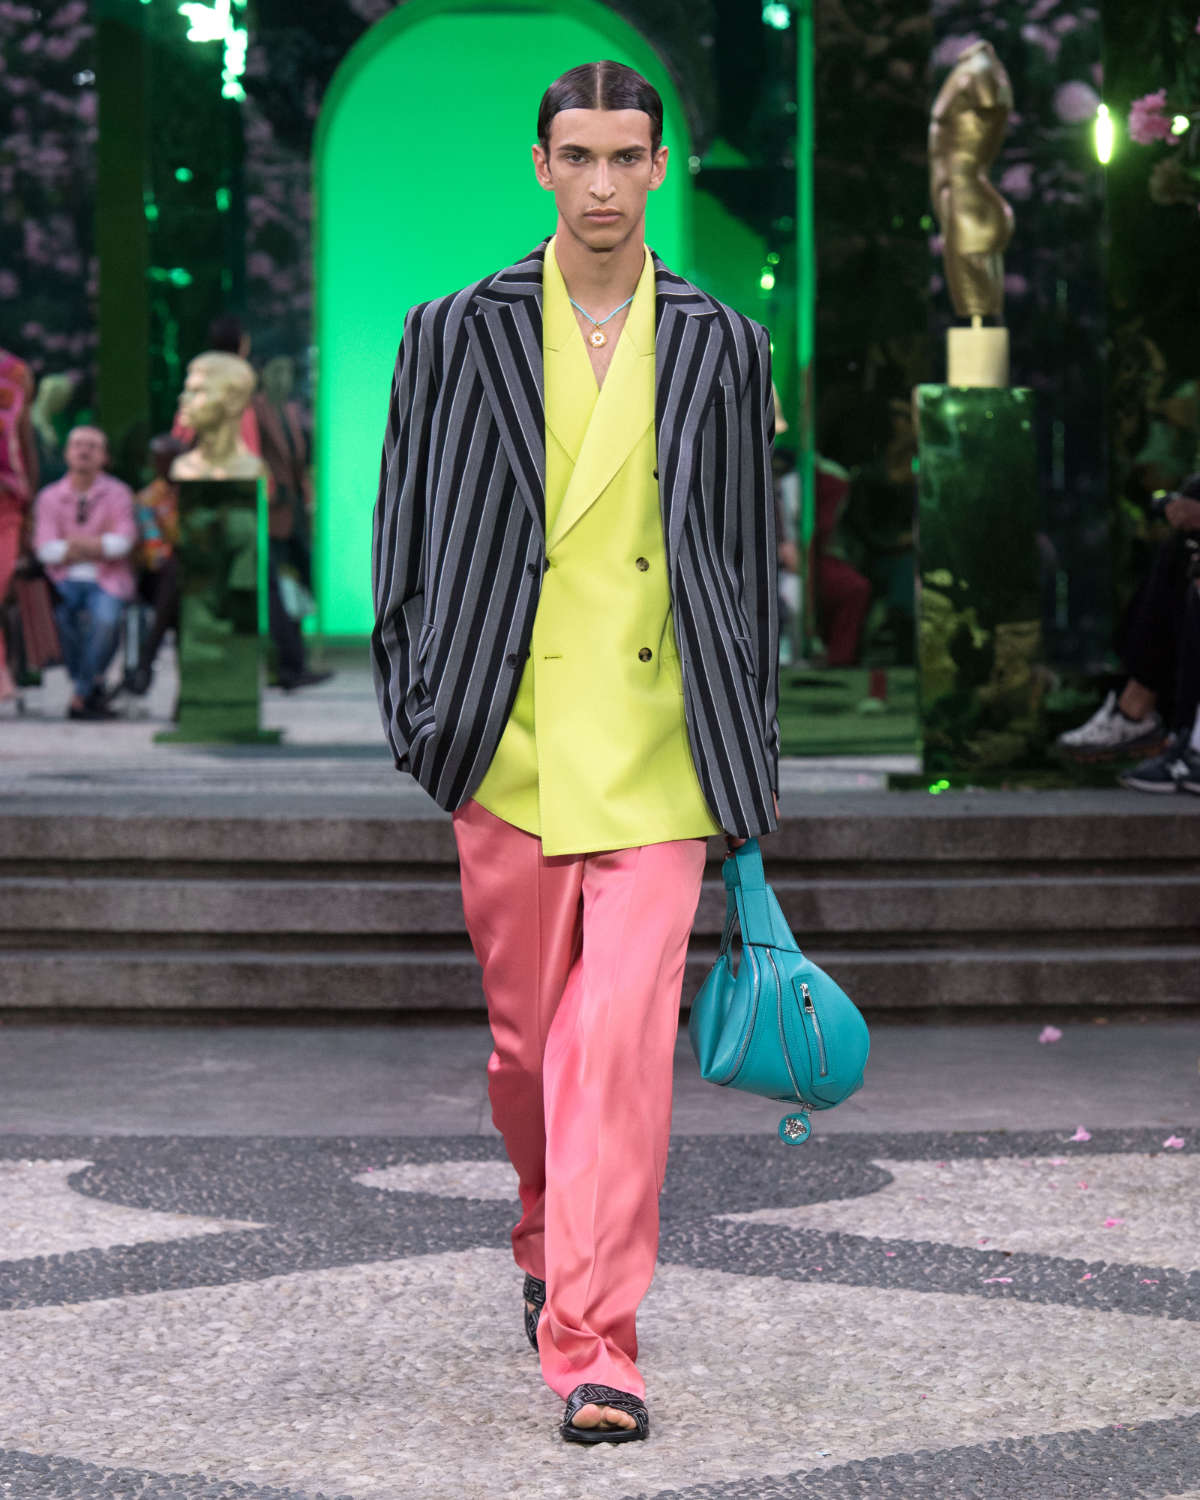 Versace Presents Its New Spring-Summer 2023 Men’s Collection